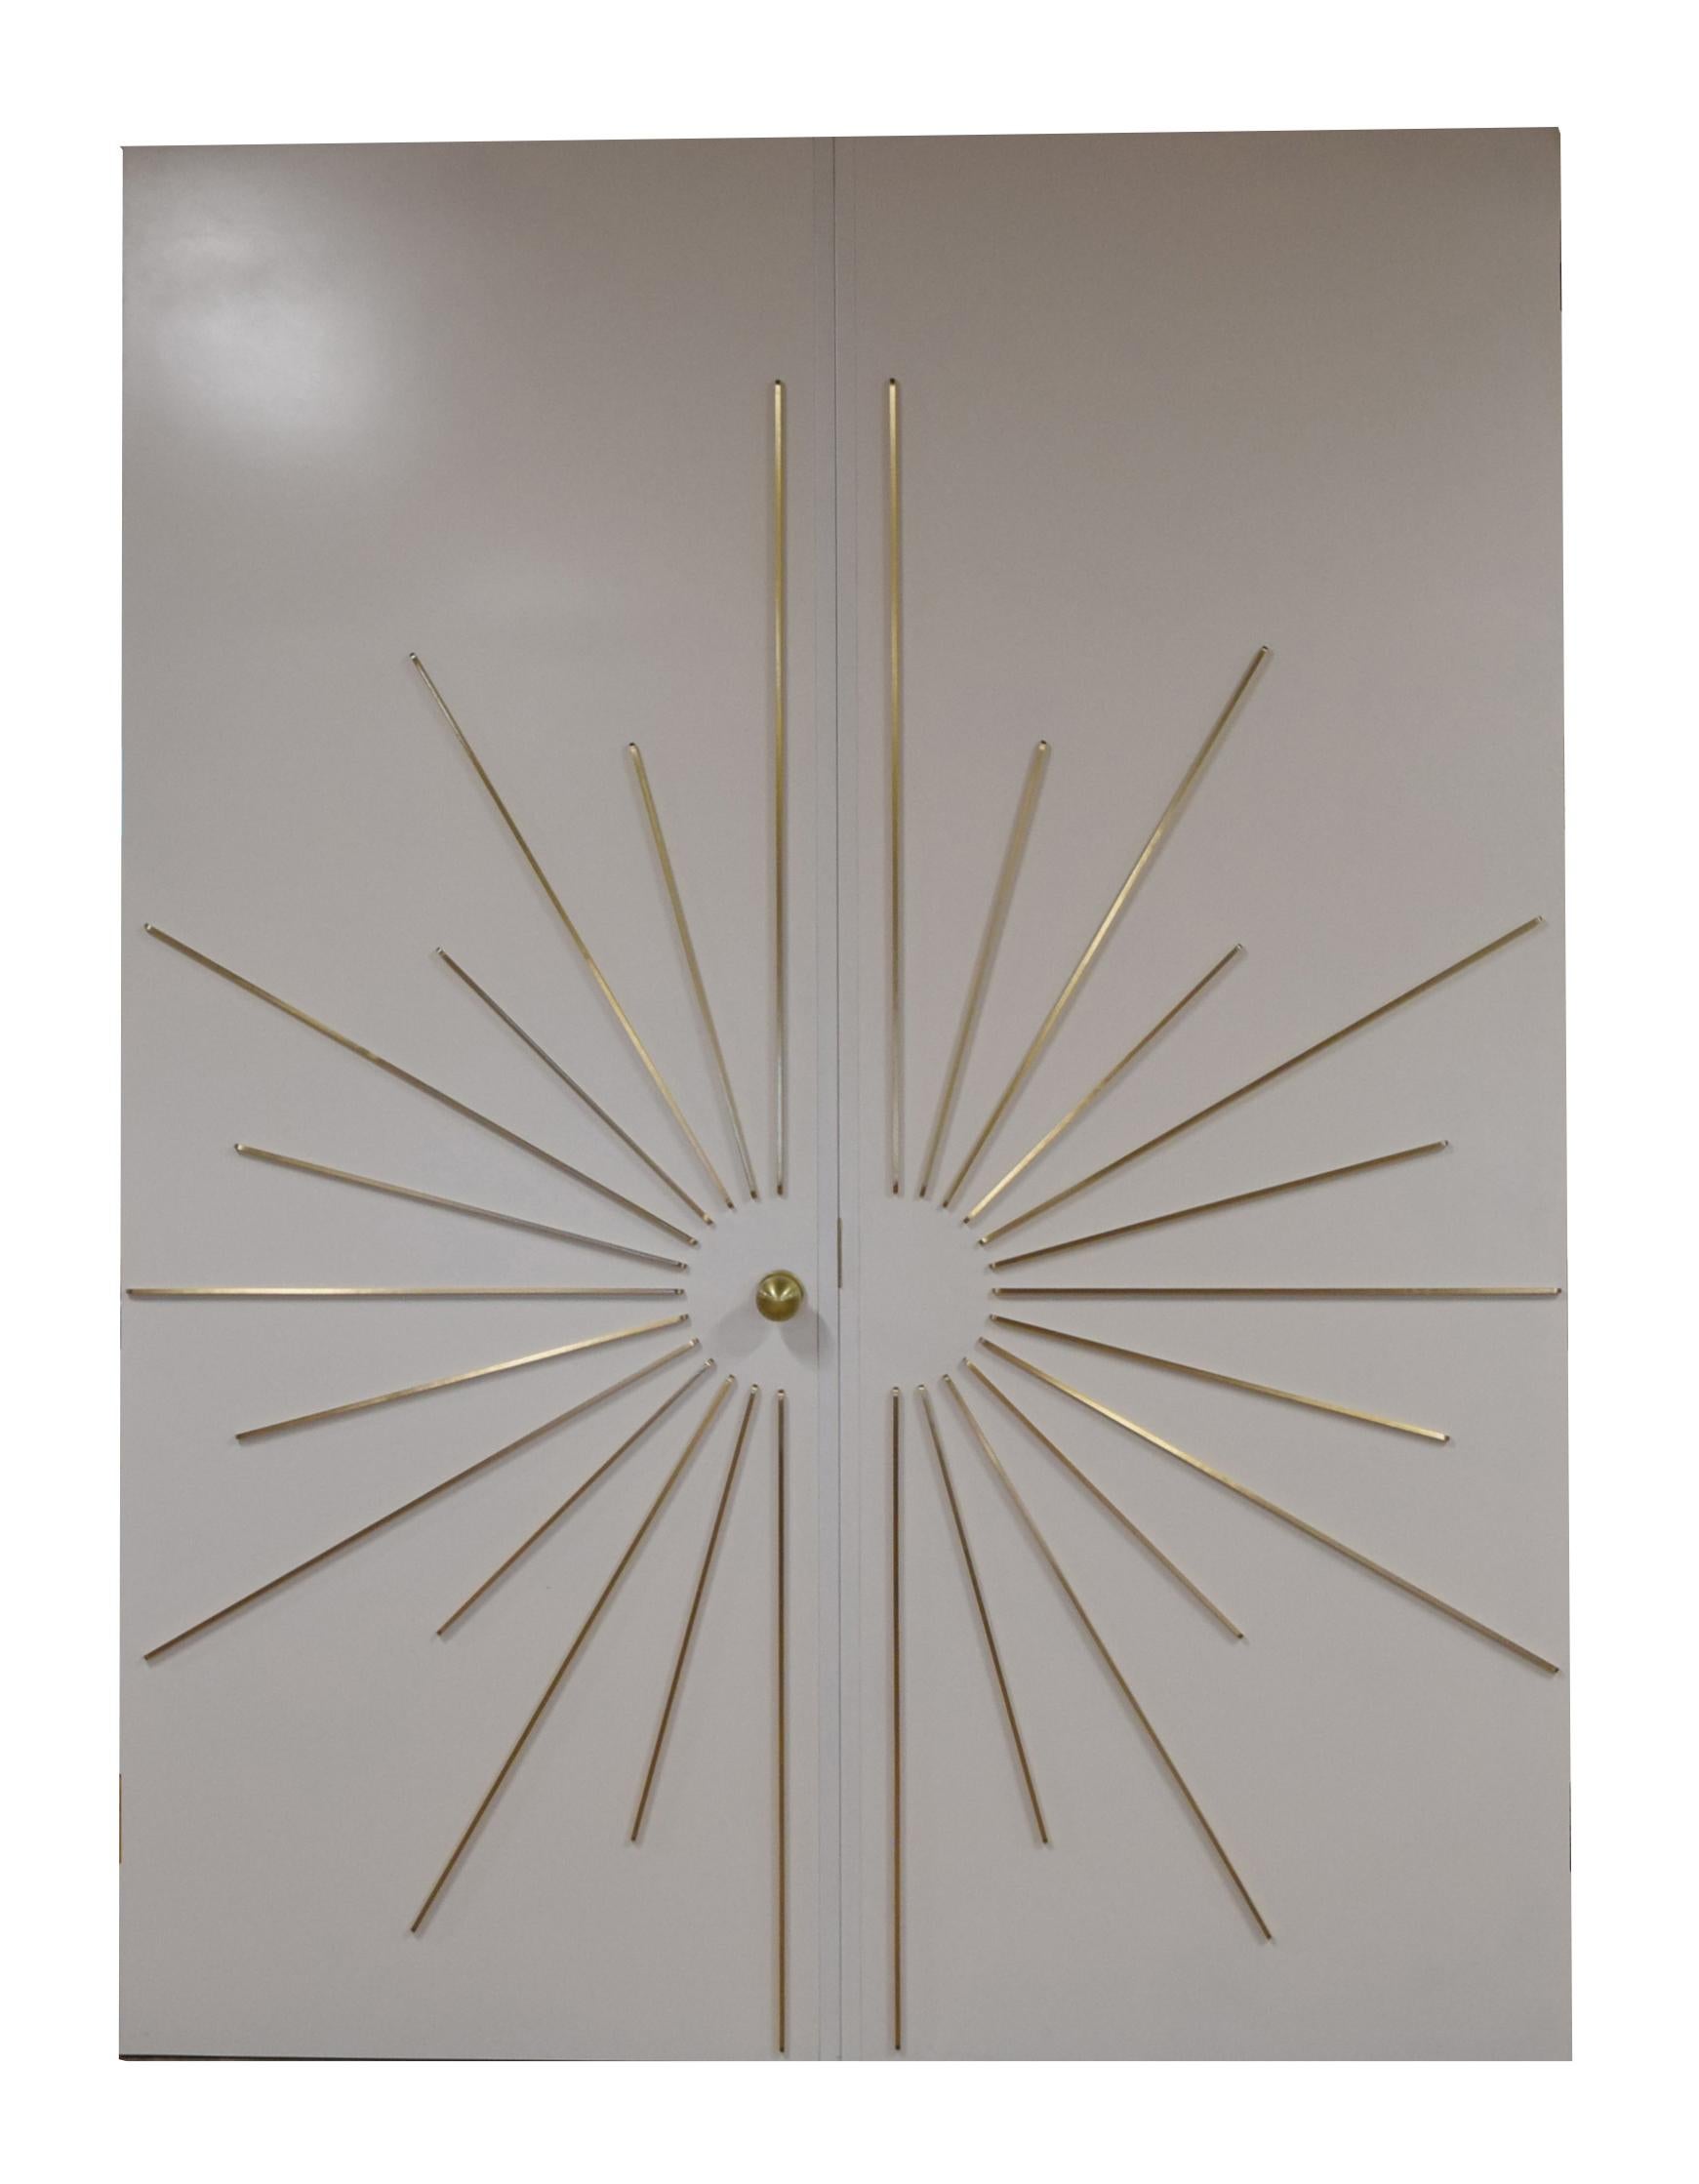 Entrance or Passage Way Large Double Door Starburst Hardware Kit In New Condition For Sale In South Charleston, WV